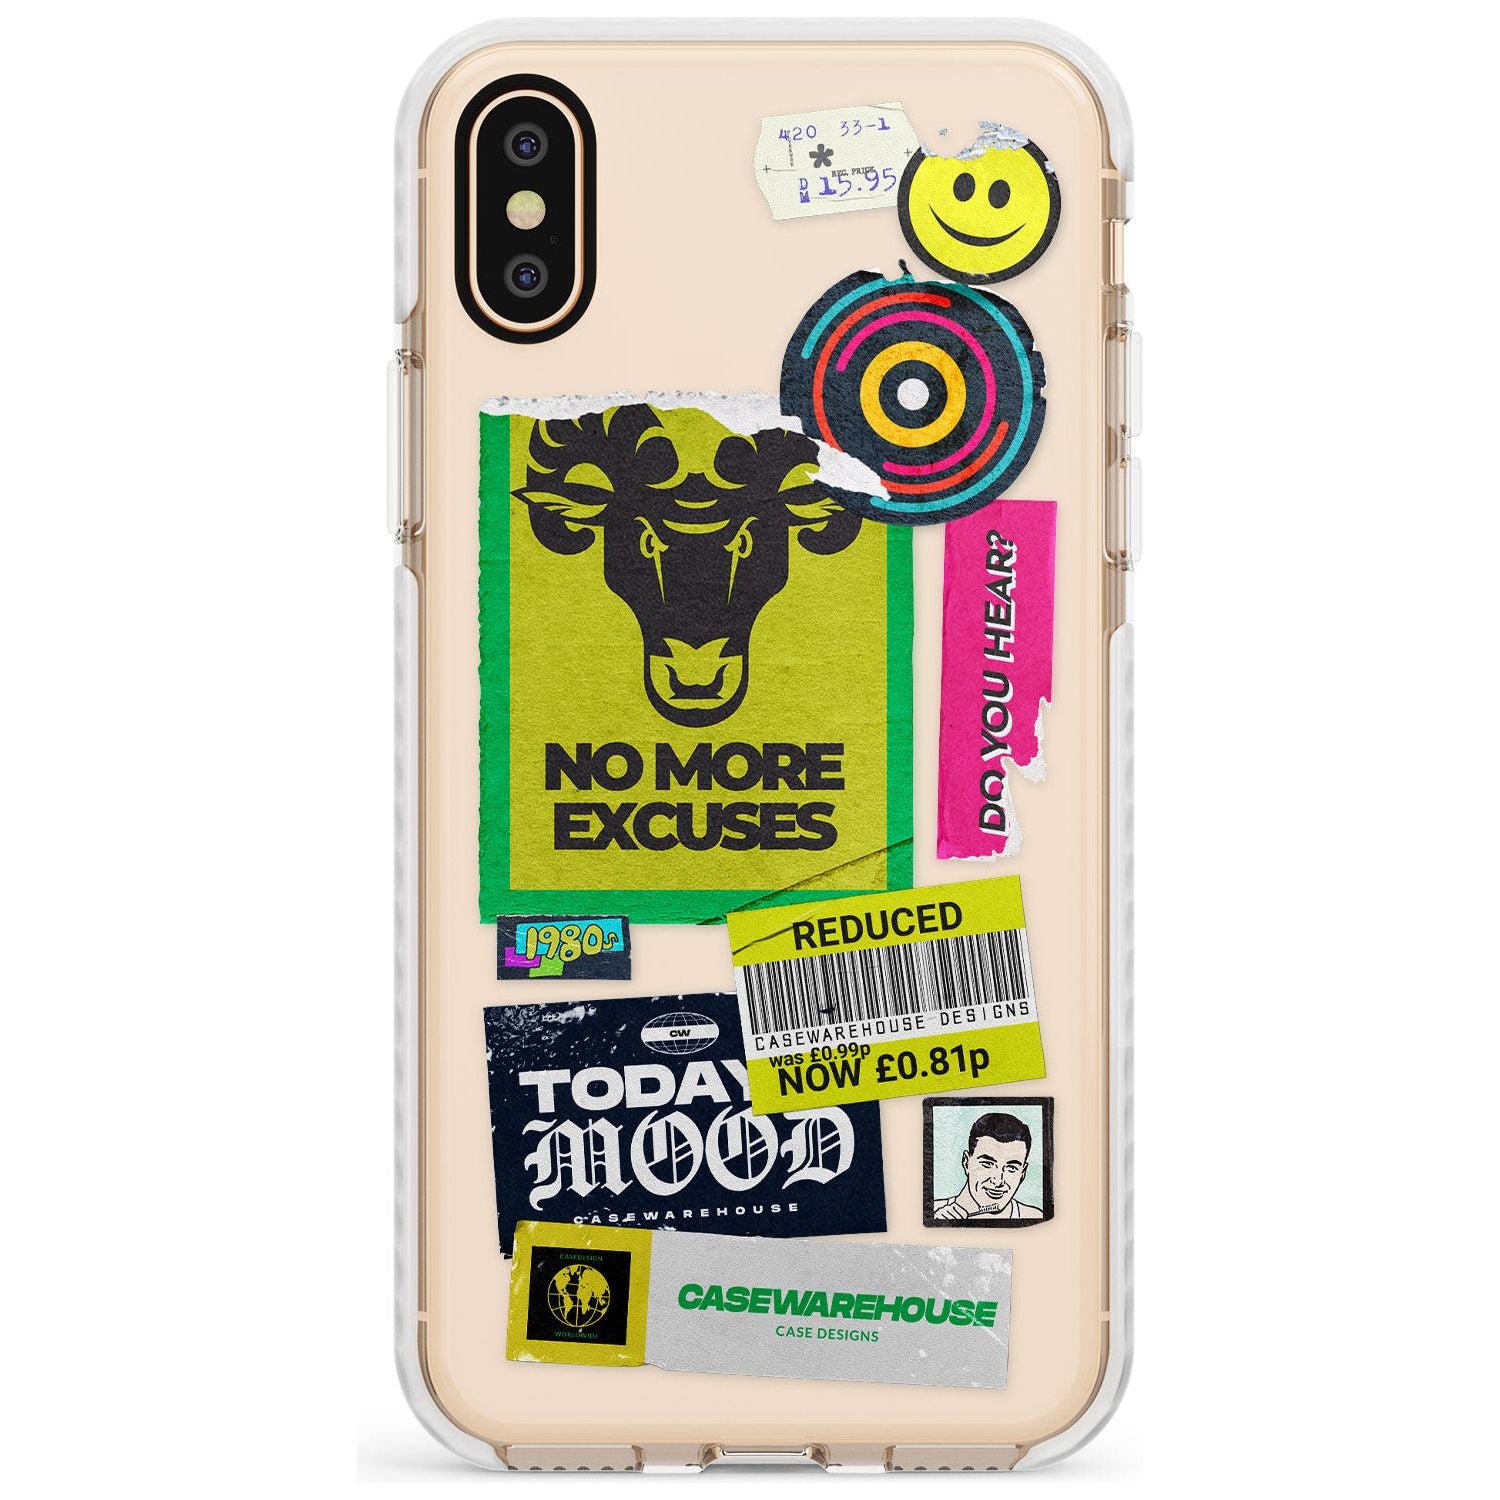 No More Excuses Sticker Mix Slim TPU Phone Case Warehouse X XS Max XR